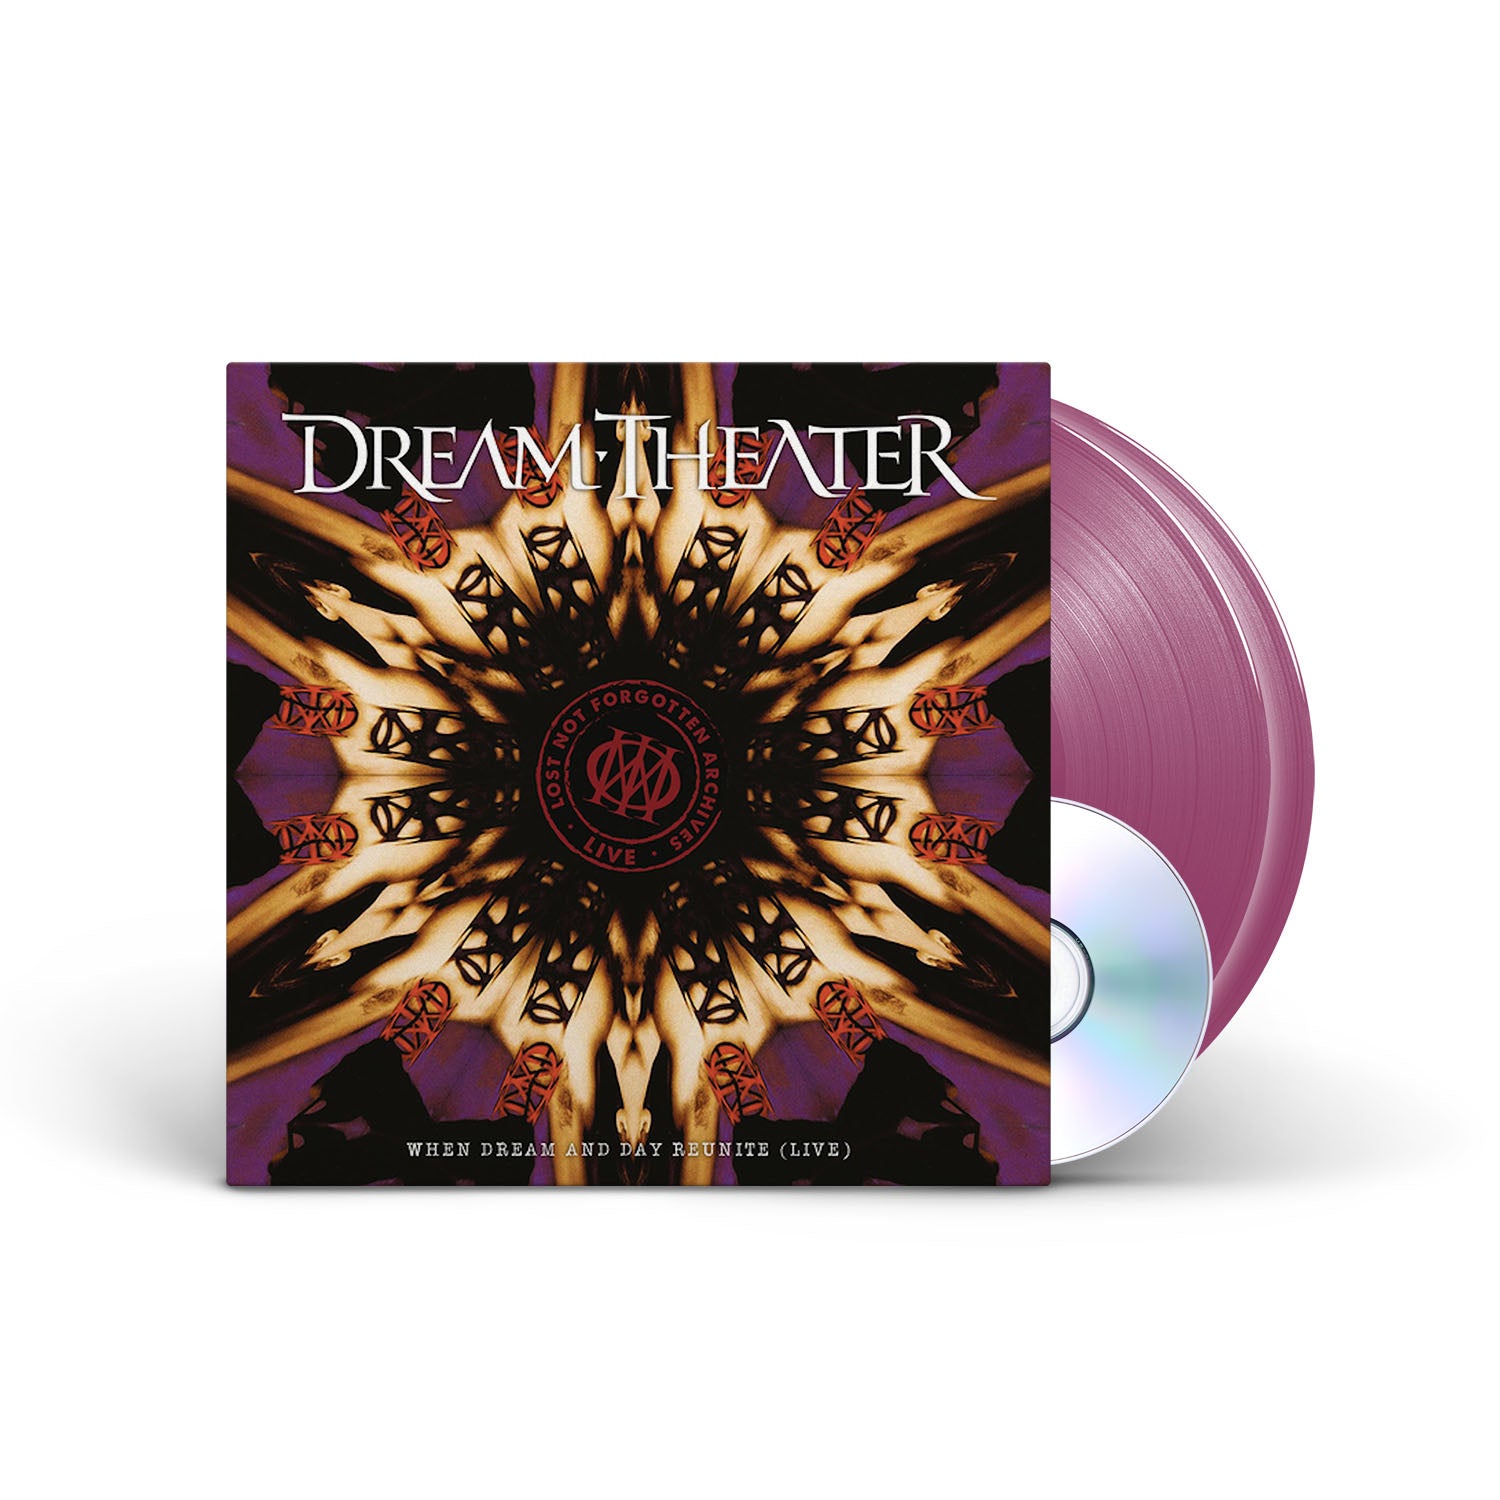 DREAM THEATER - Lost Not Forgotten Archives: When Dream And Day Reunite (Live) - Orchid 2xLP + CD